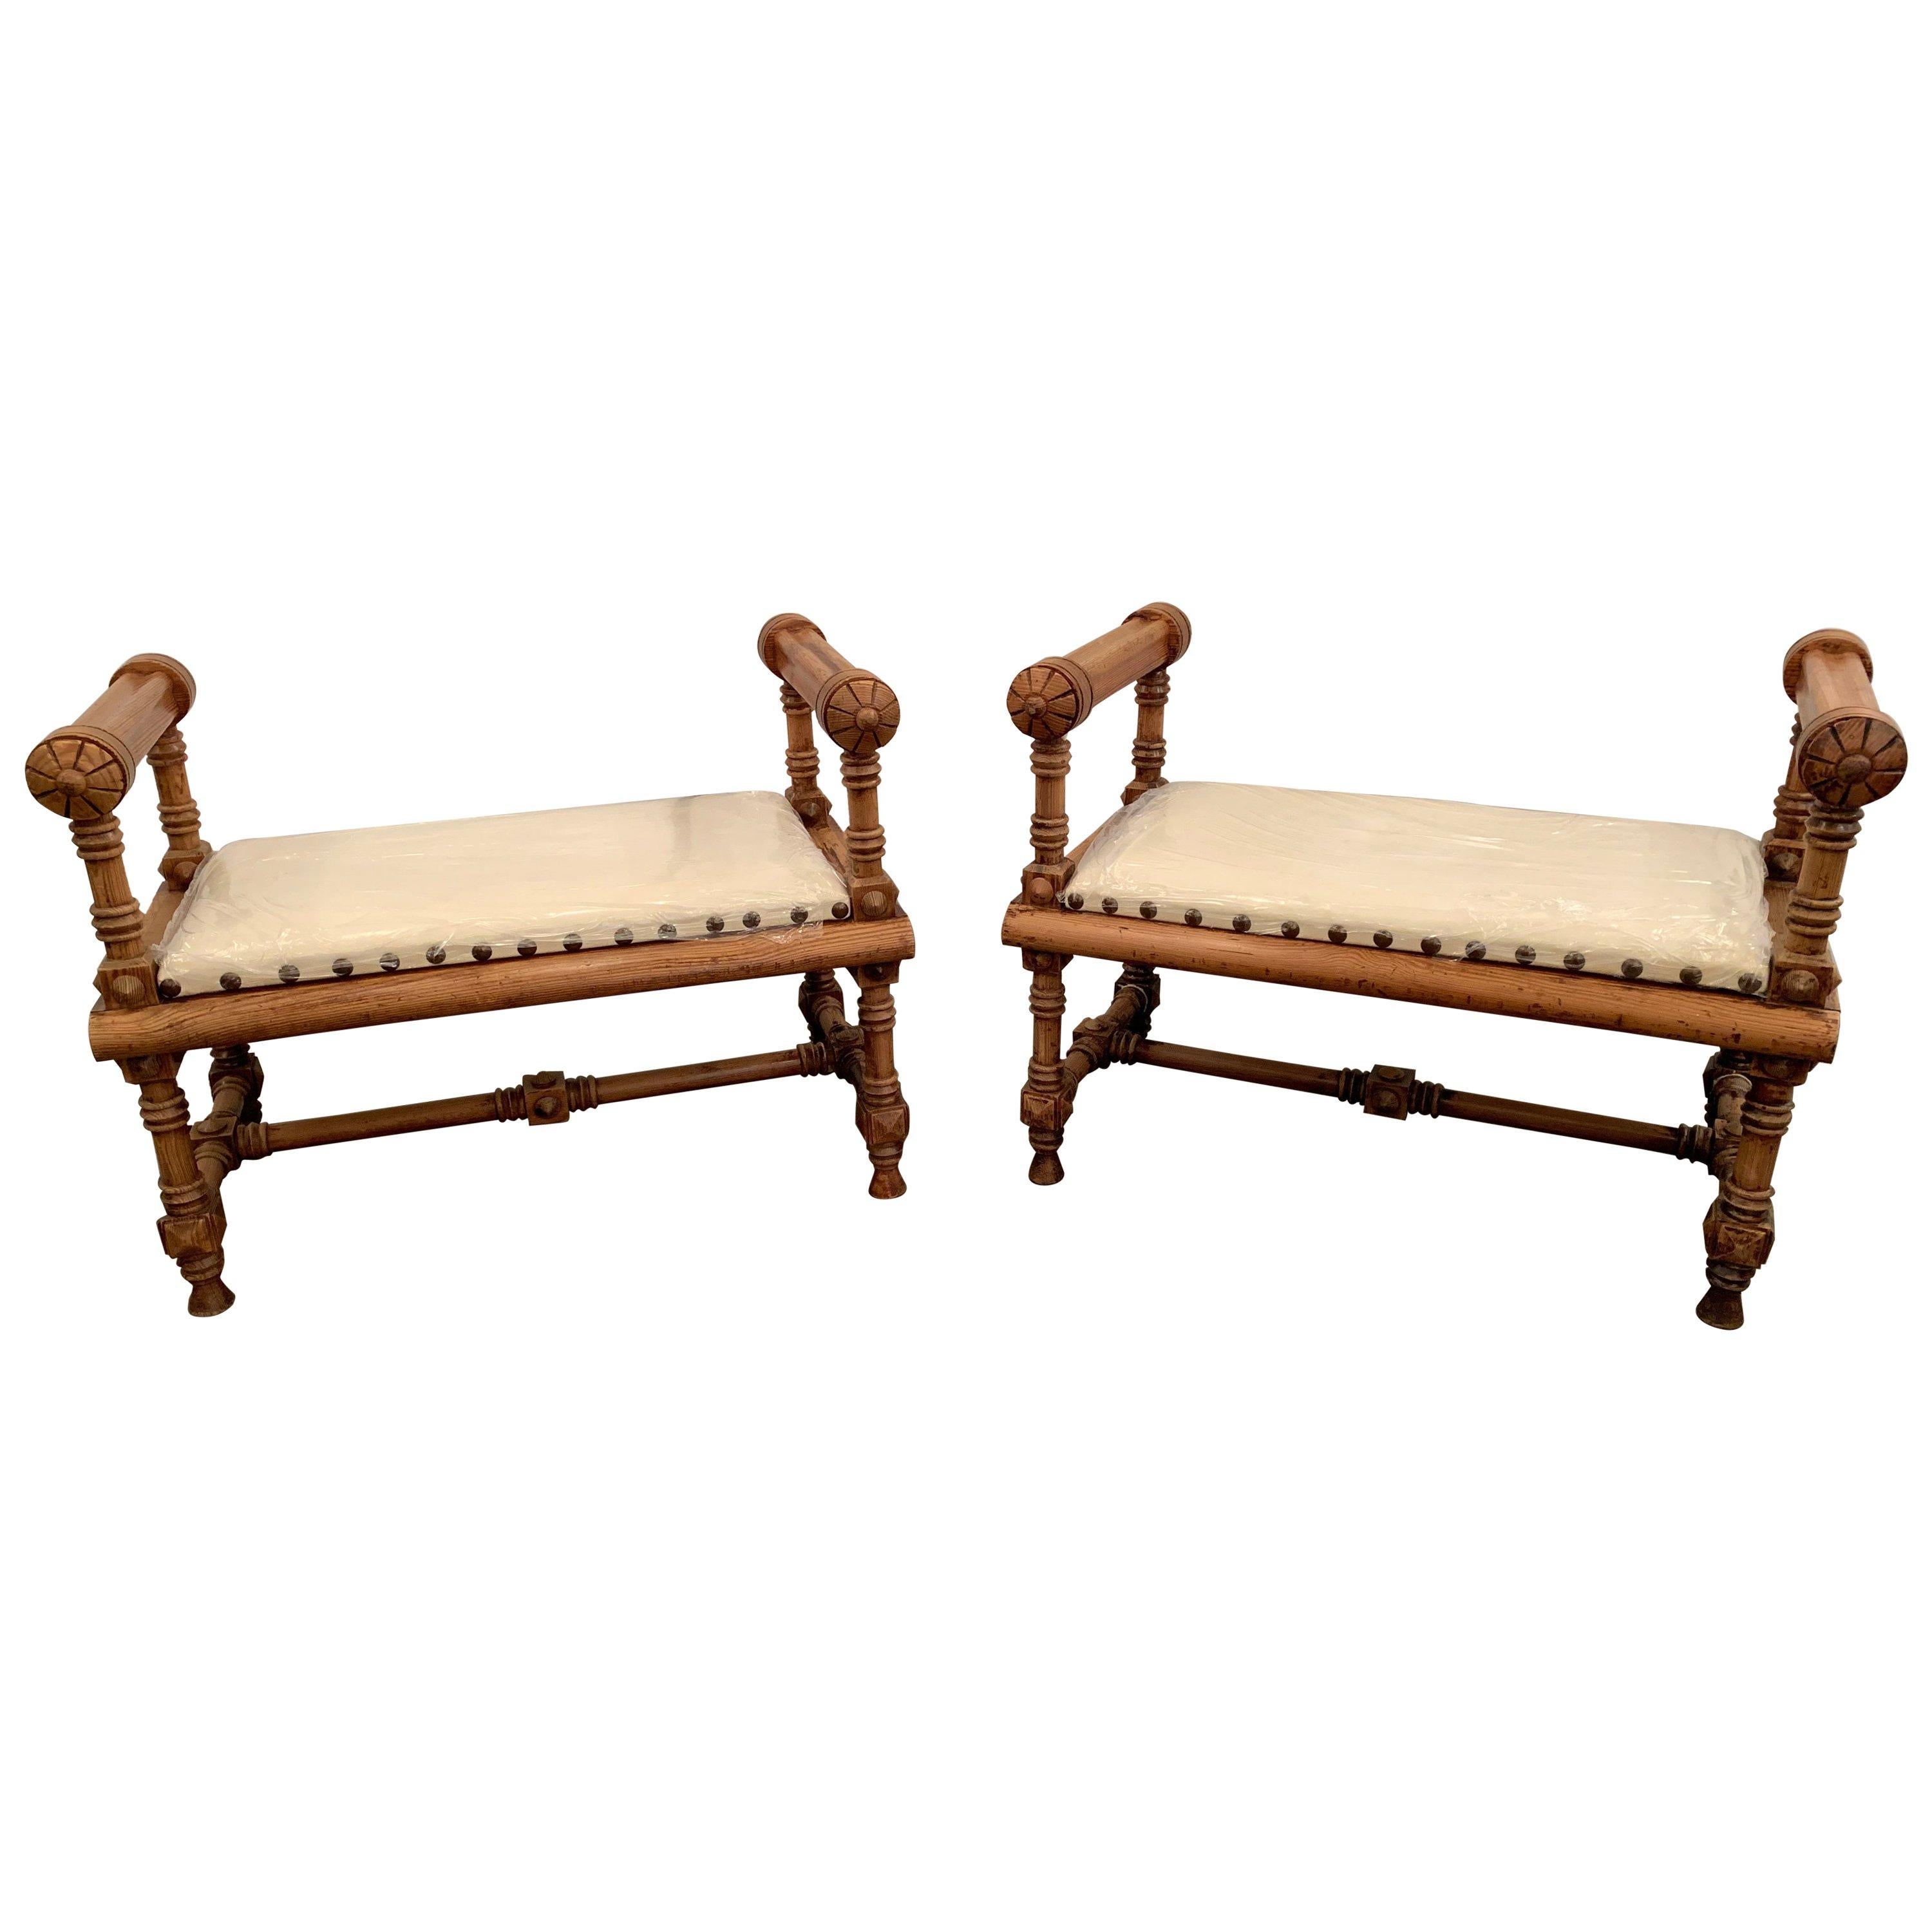 Pair of Victorian Antique Benches